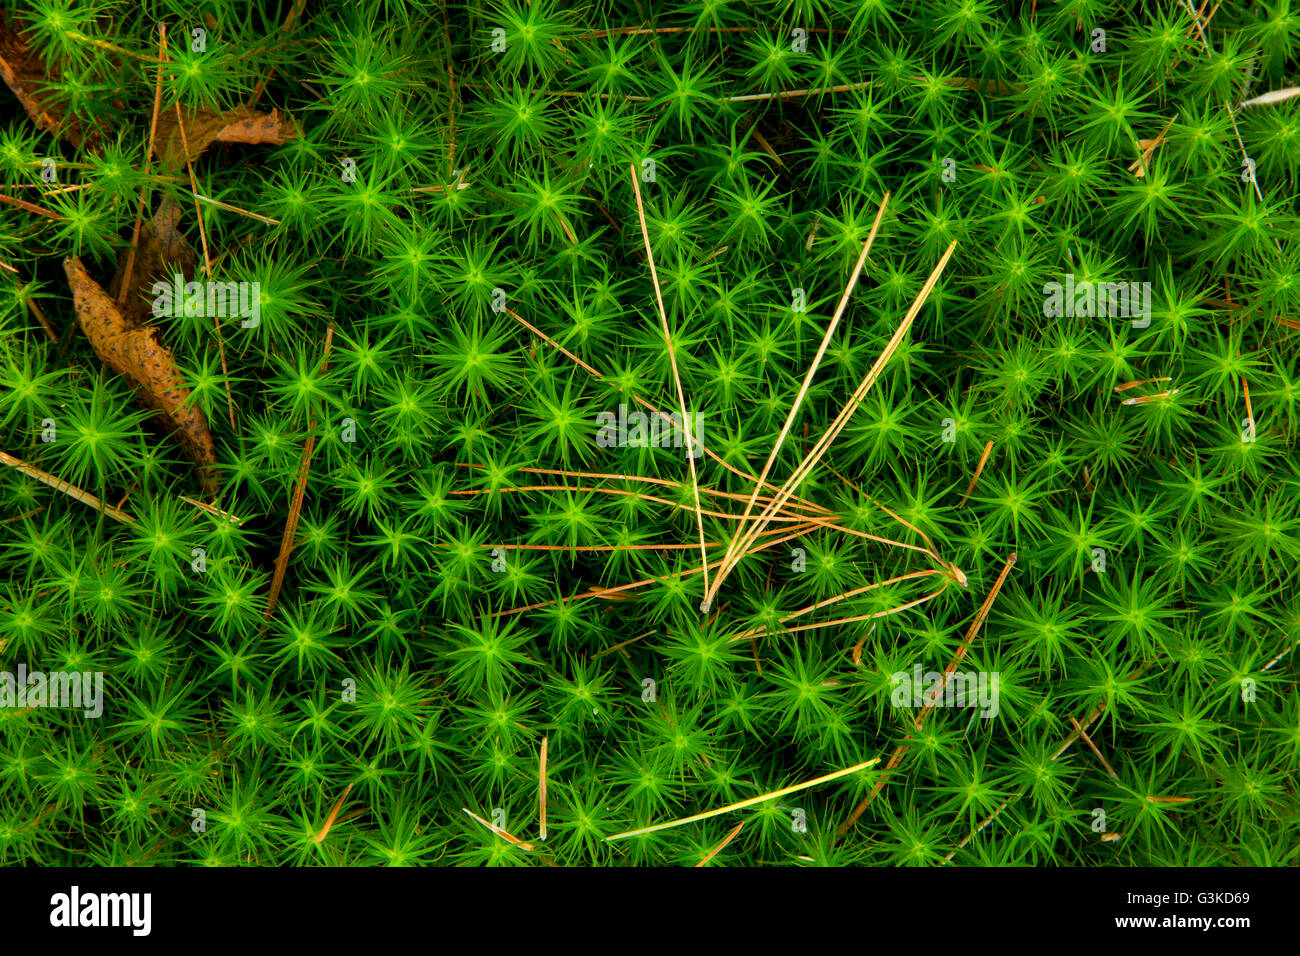 Moss with pine needle, Woodenfrog State Forest Campground, Kabetogama State Forest, Voyageurs National Park, Minnesota Stock Photo